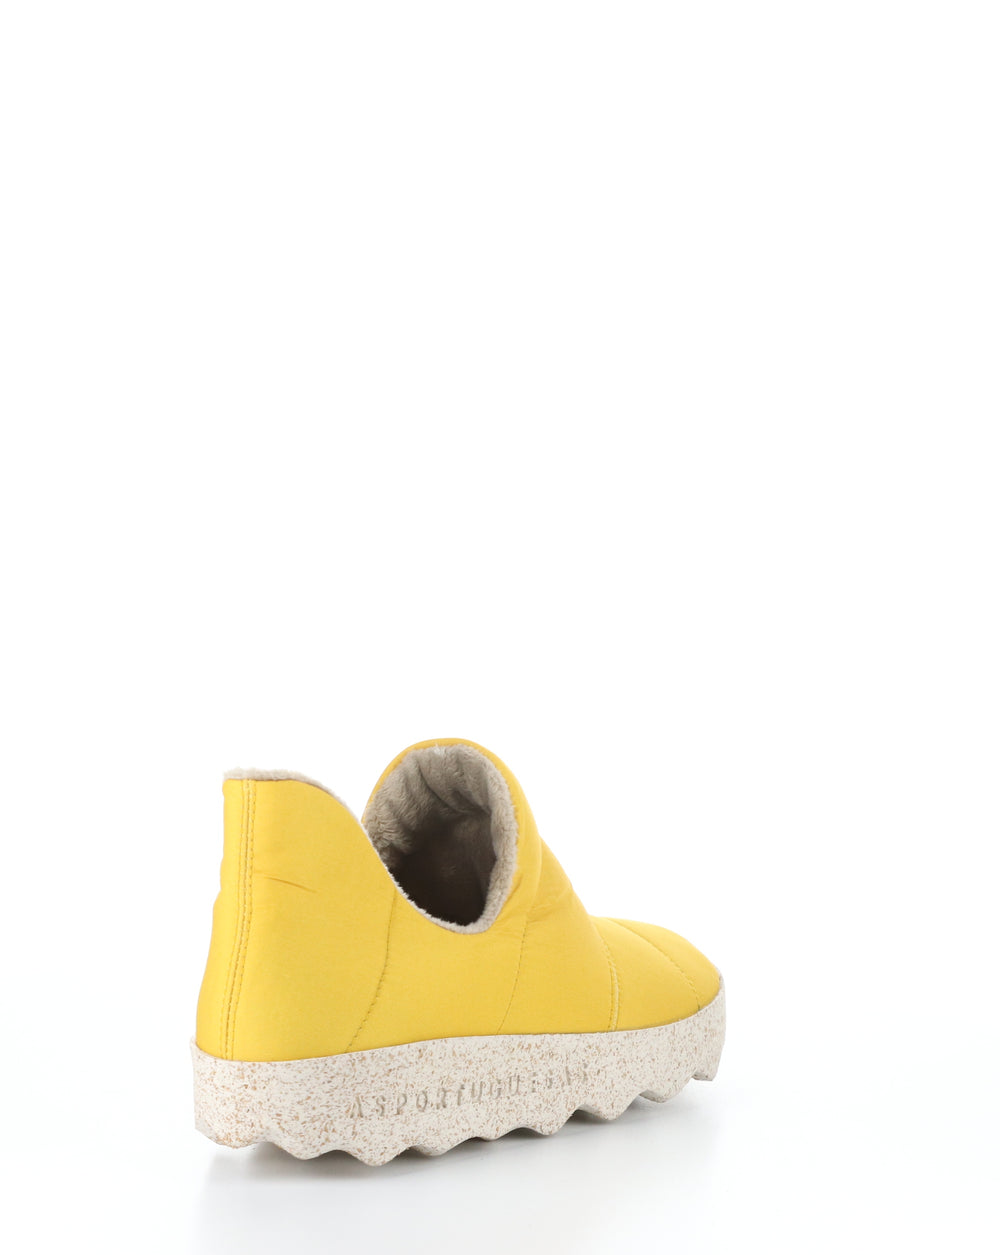 CRUS145ASP Yellow Round Toe Shoes